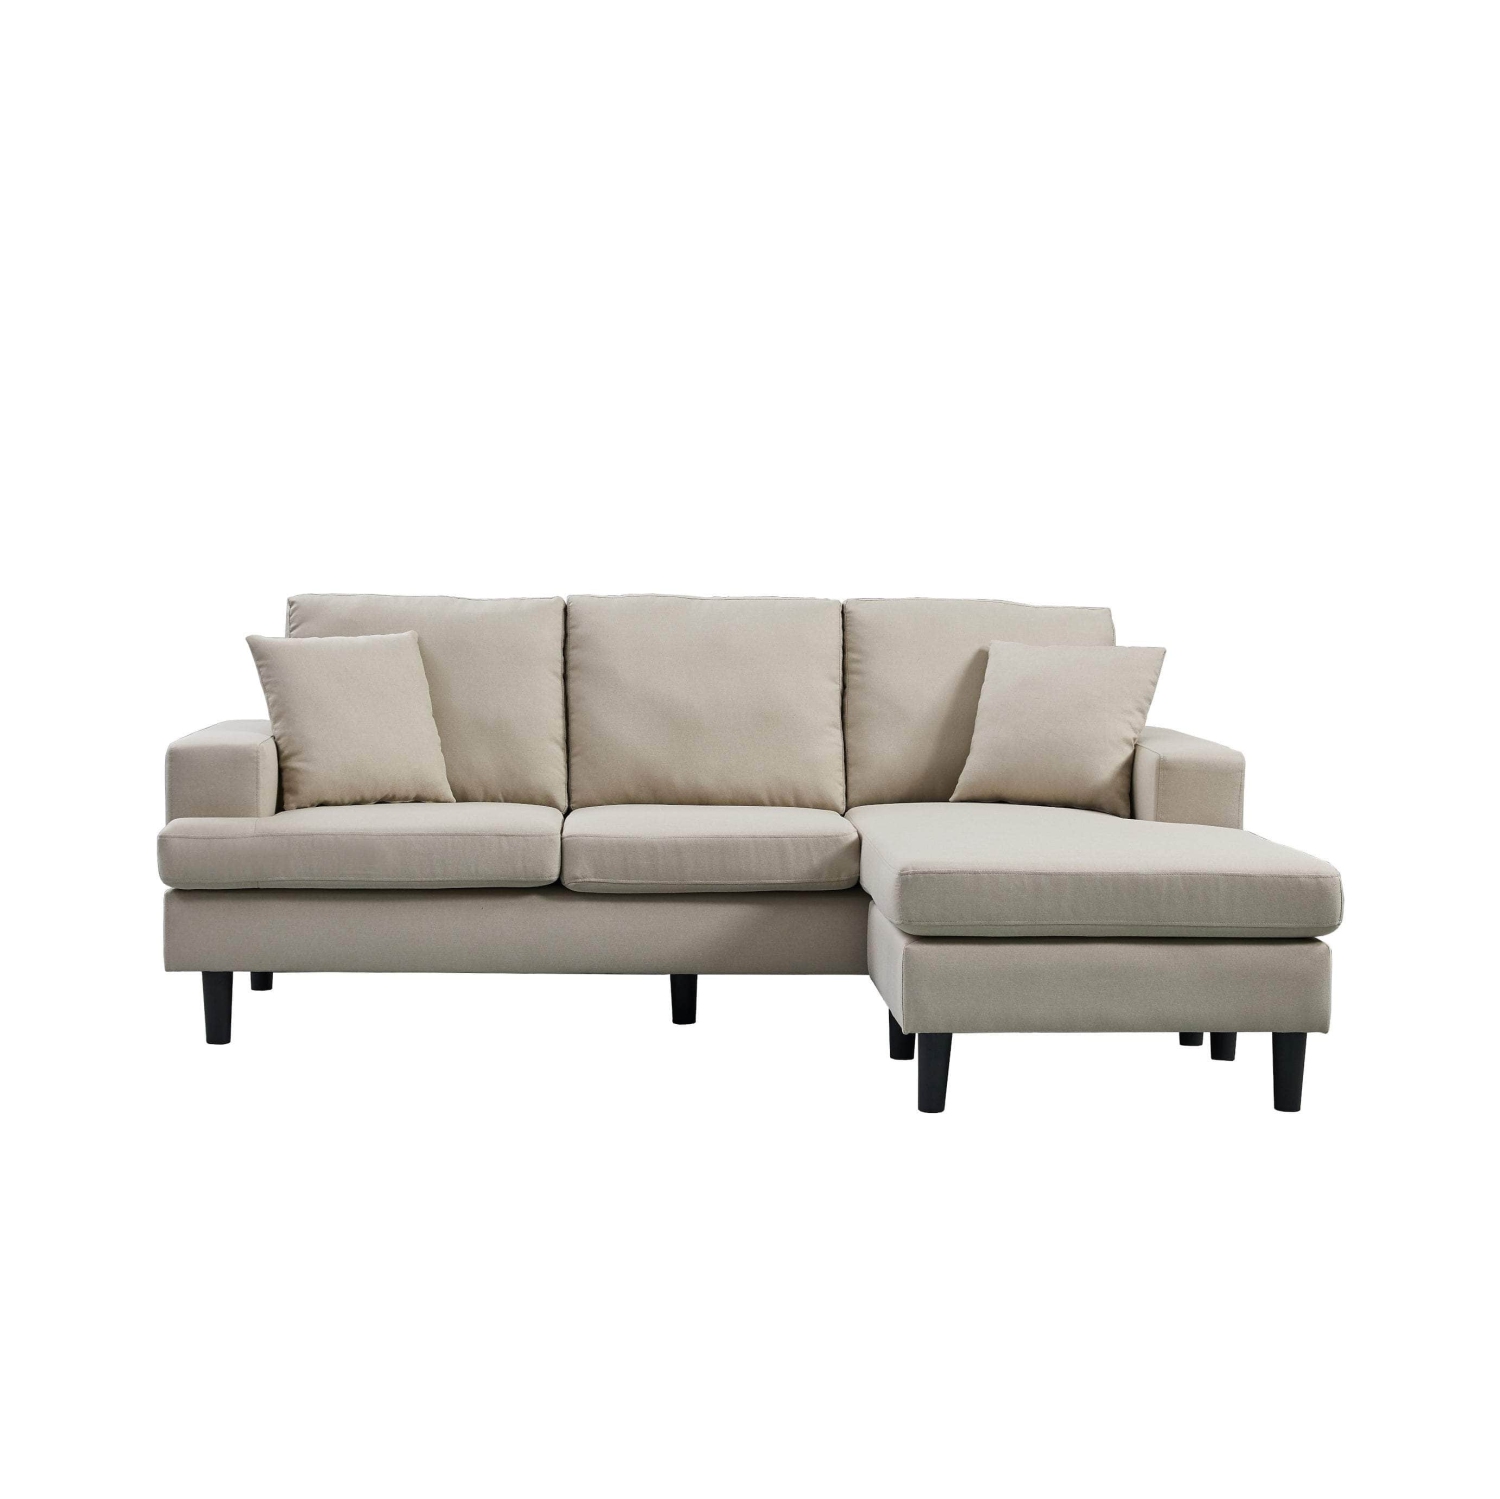 Urban Cali Sophia 84" Wide Sectional Sofa with Reversible Chaise - Cream